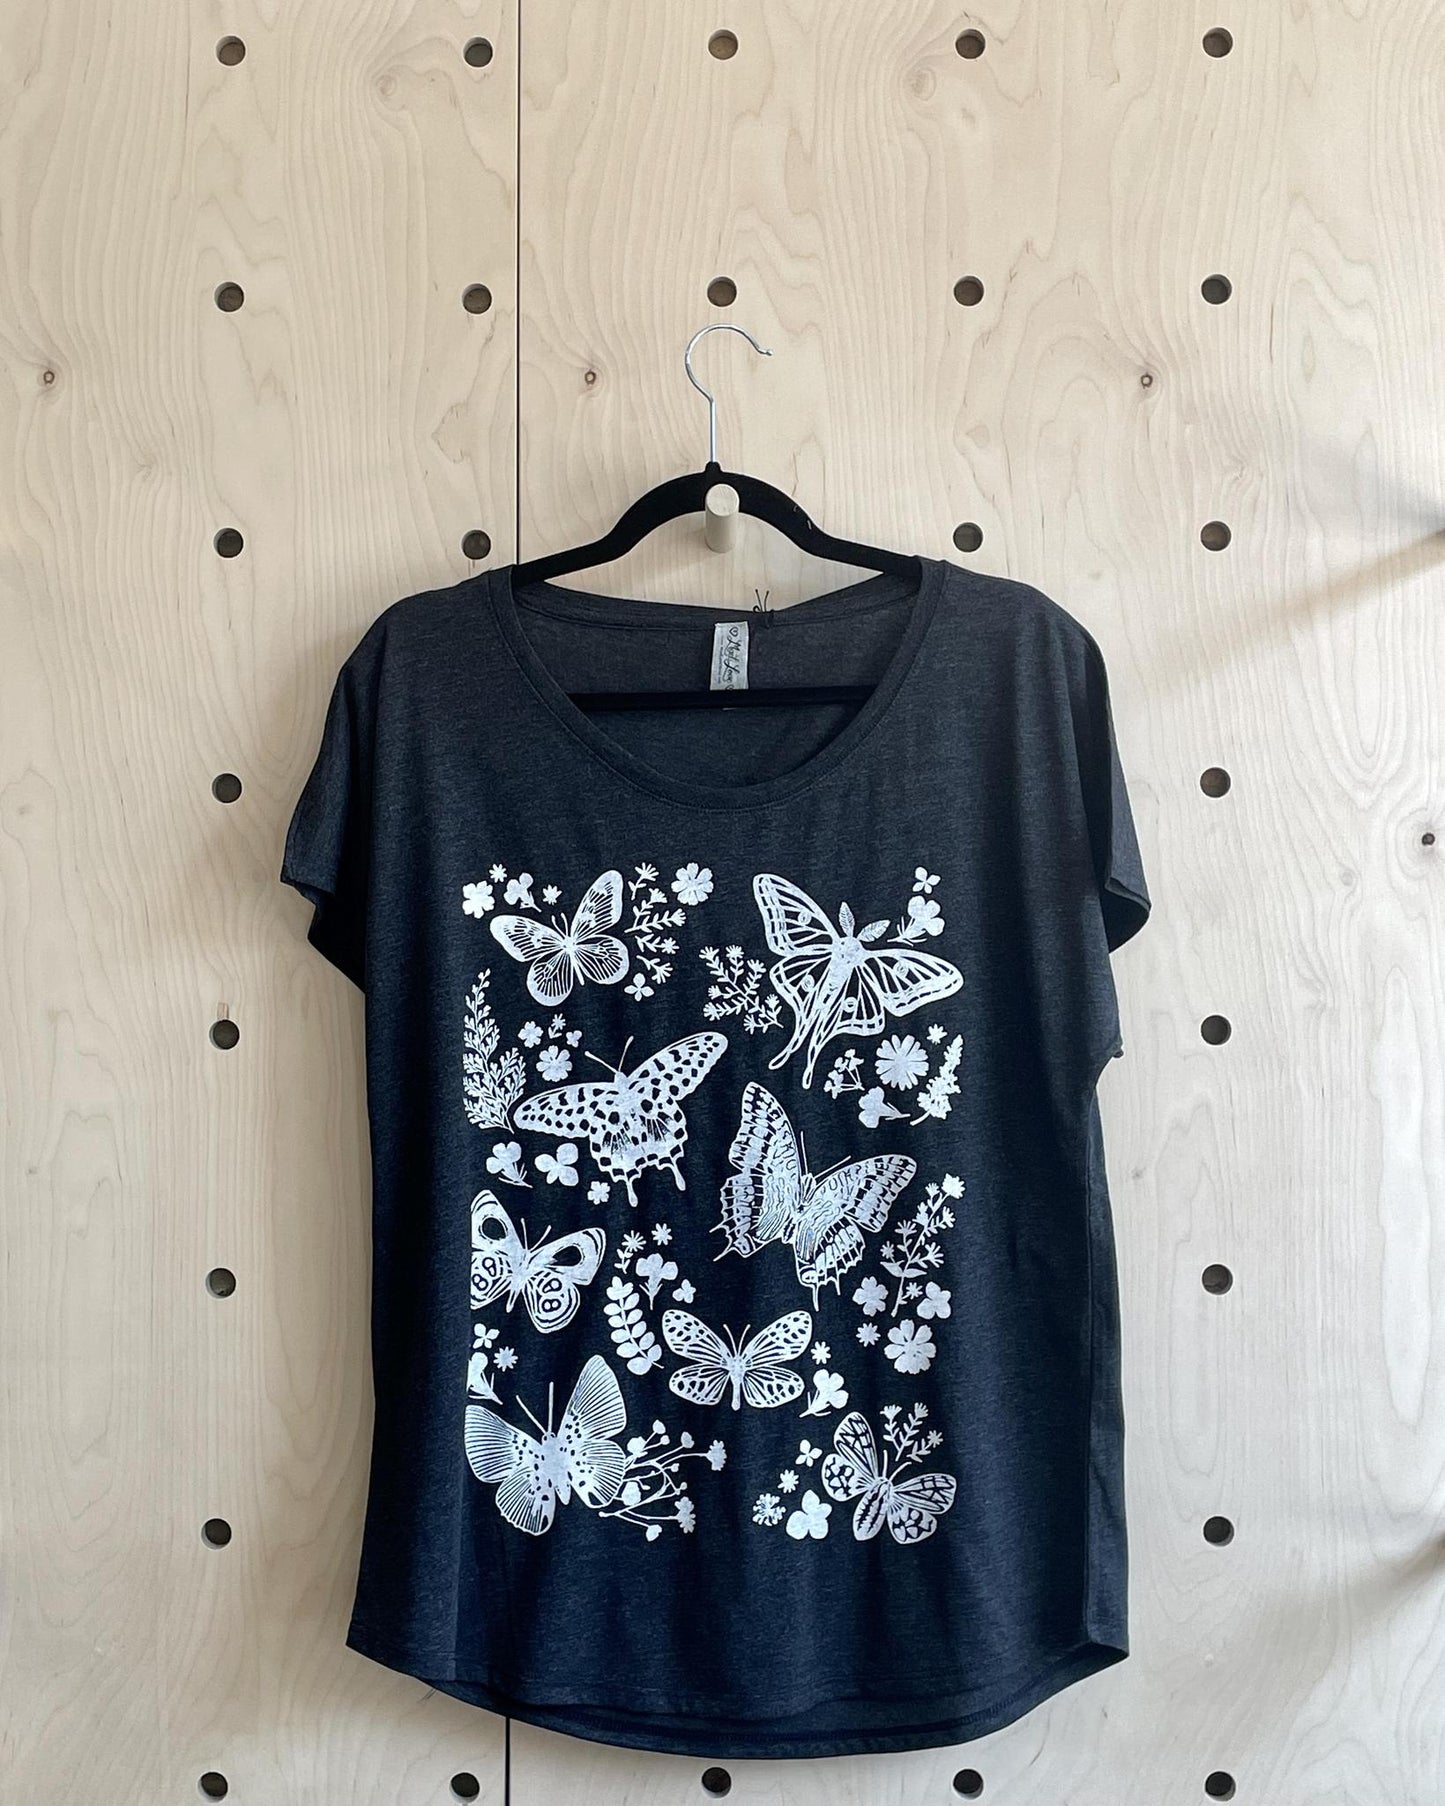 Mad Love Black Dolman Top with Moths & Butterflies - size Small